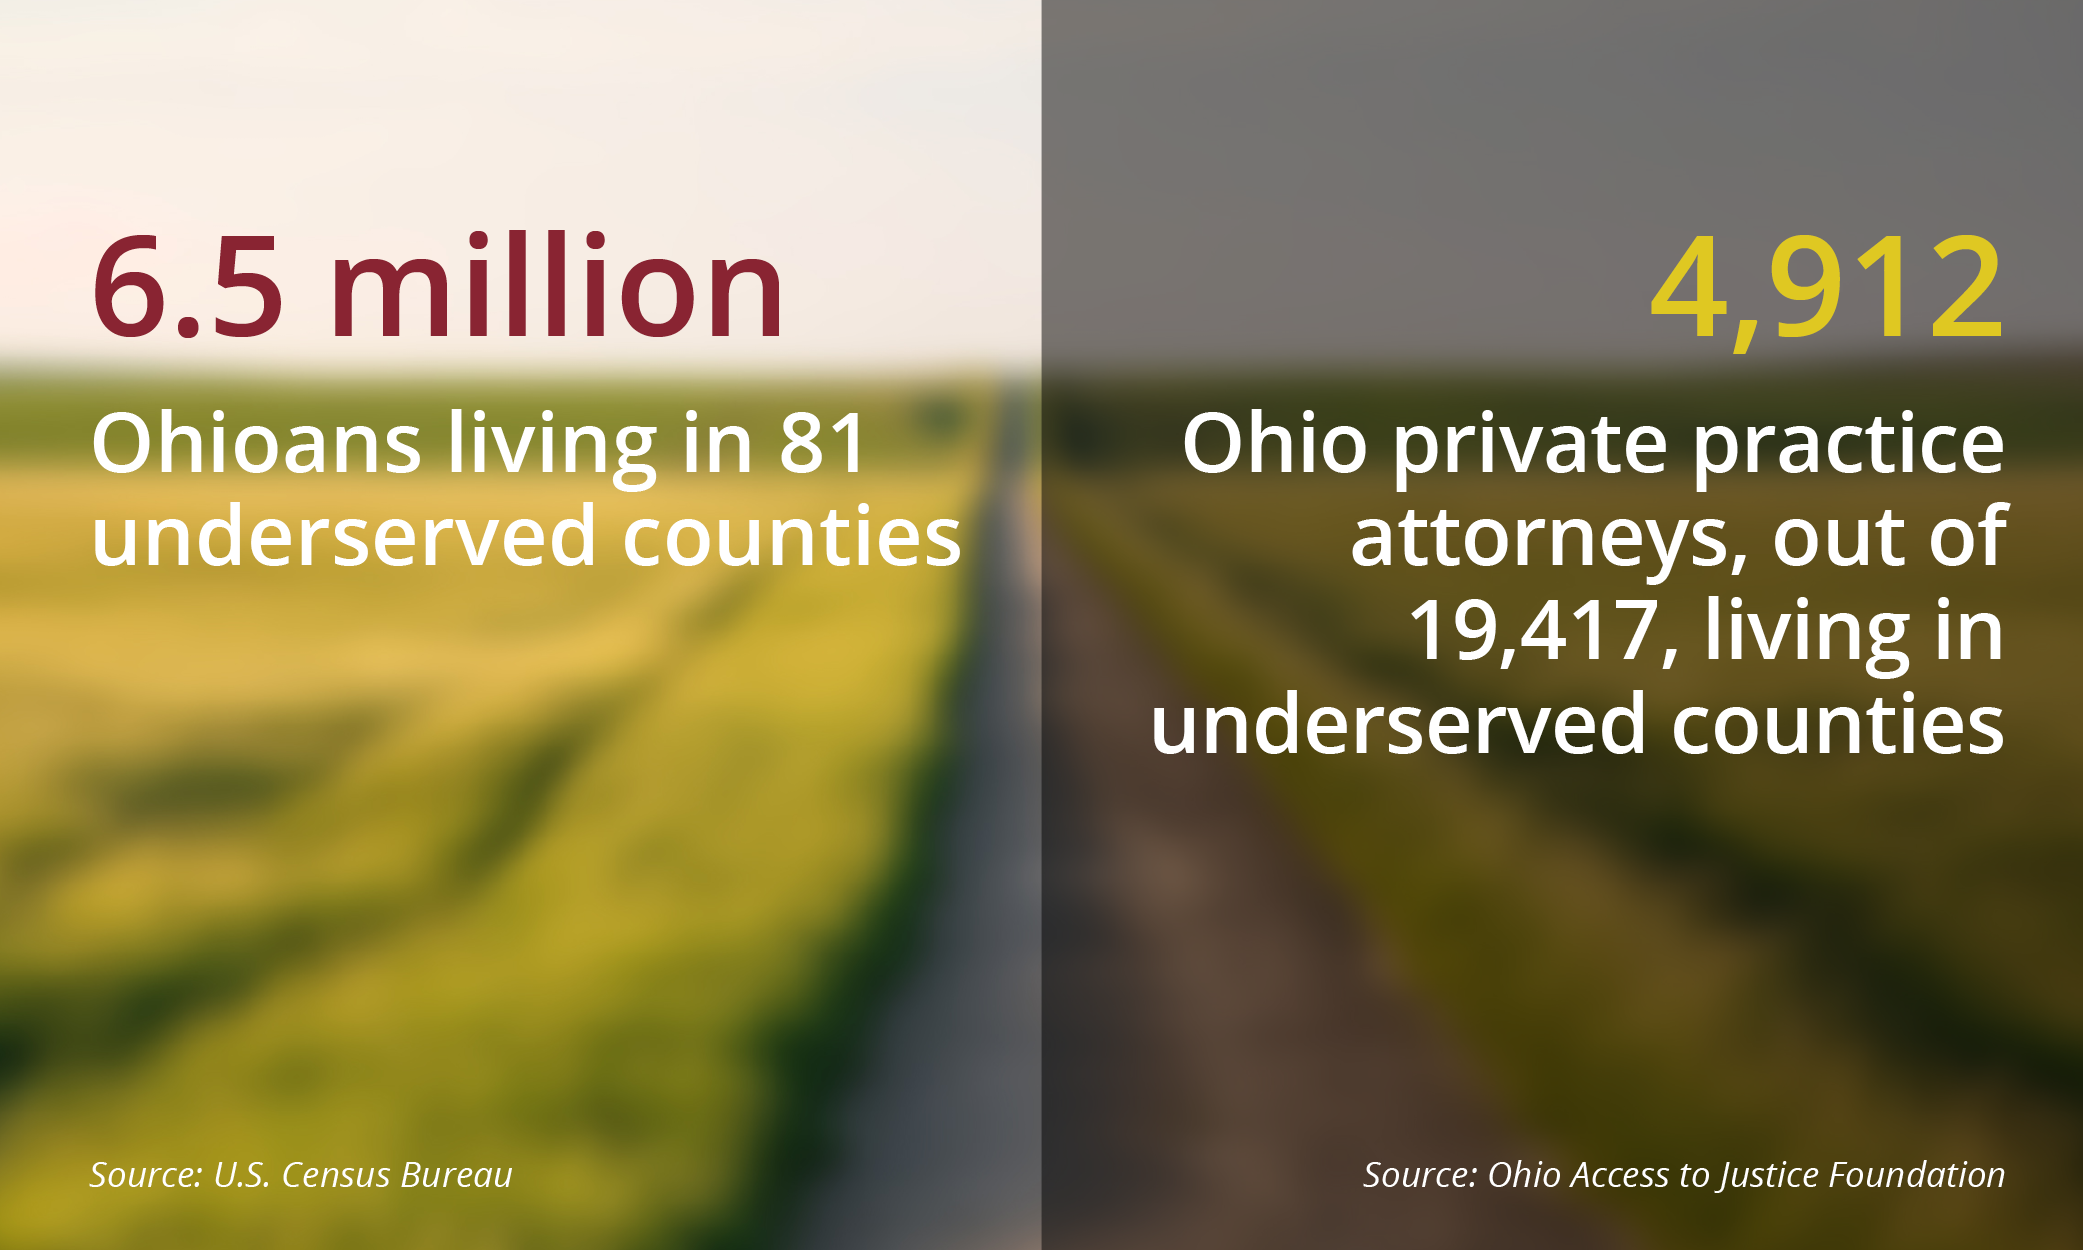 Infographic: On the left, 6.5 million Ohioans living in 81 underserved counties (Source: U.S. Census Bureau). On the right, 4,912 Ohio private practice attorneys, out of 19,417 living in underserved counties (Source: Ohio Access to Justice Foundation).